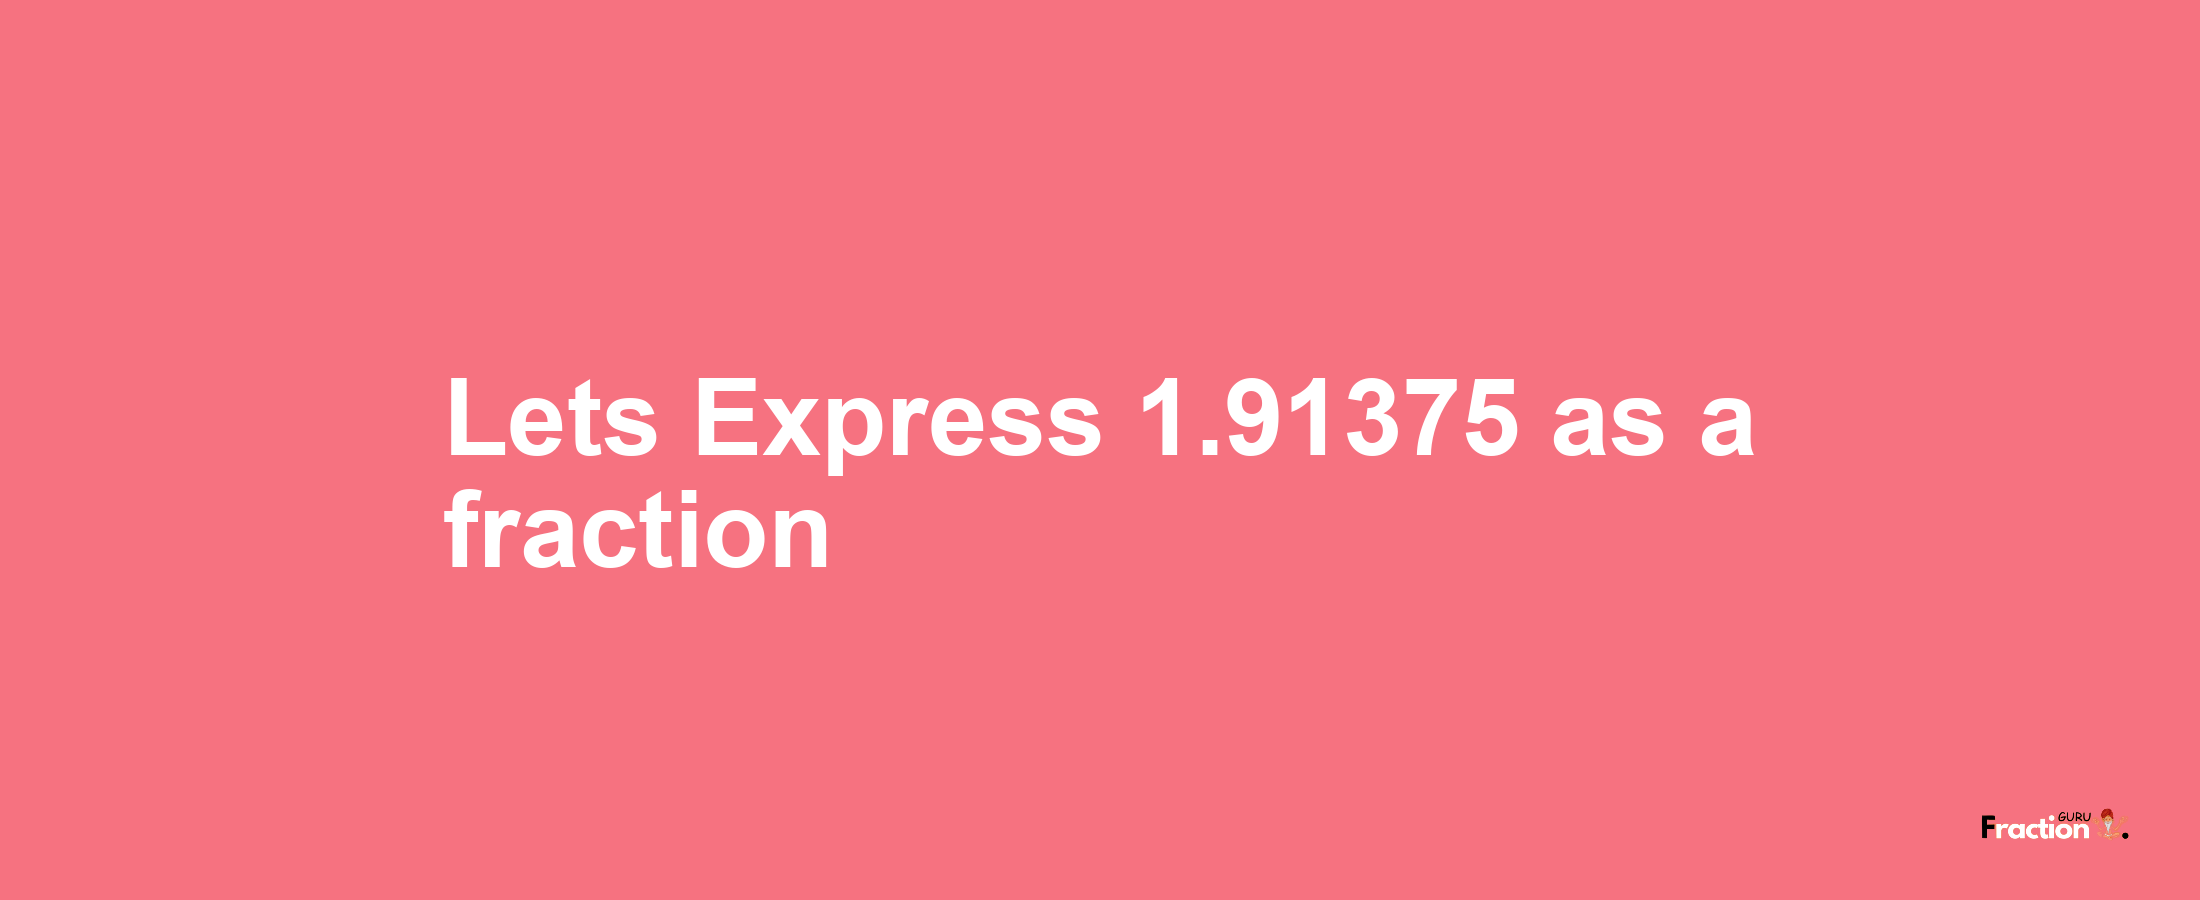 Lets Express 1.91375 as afraction